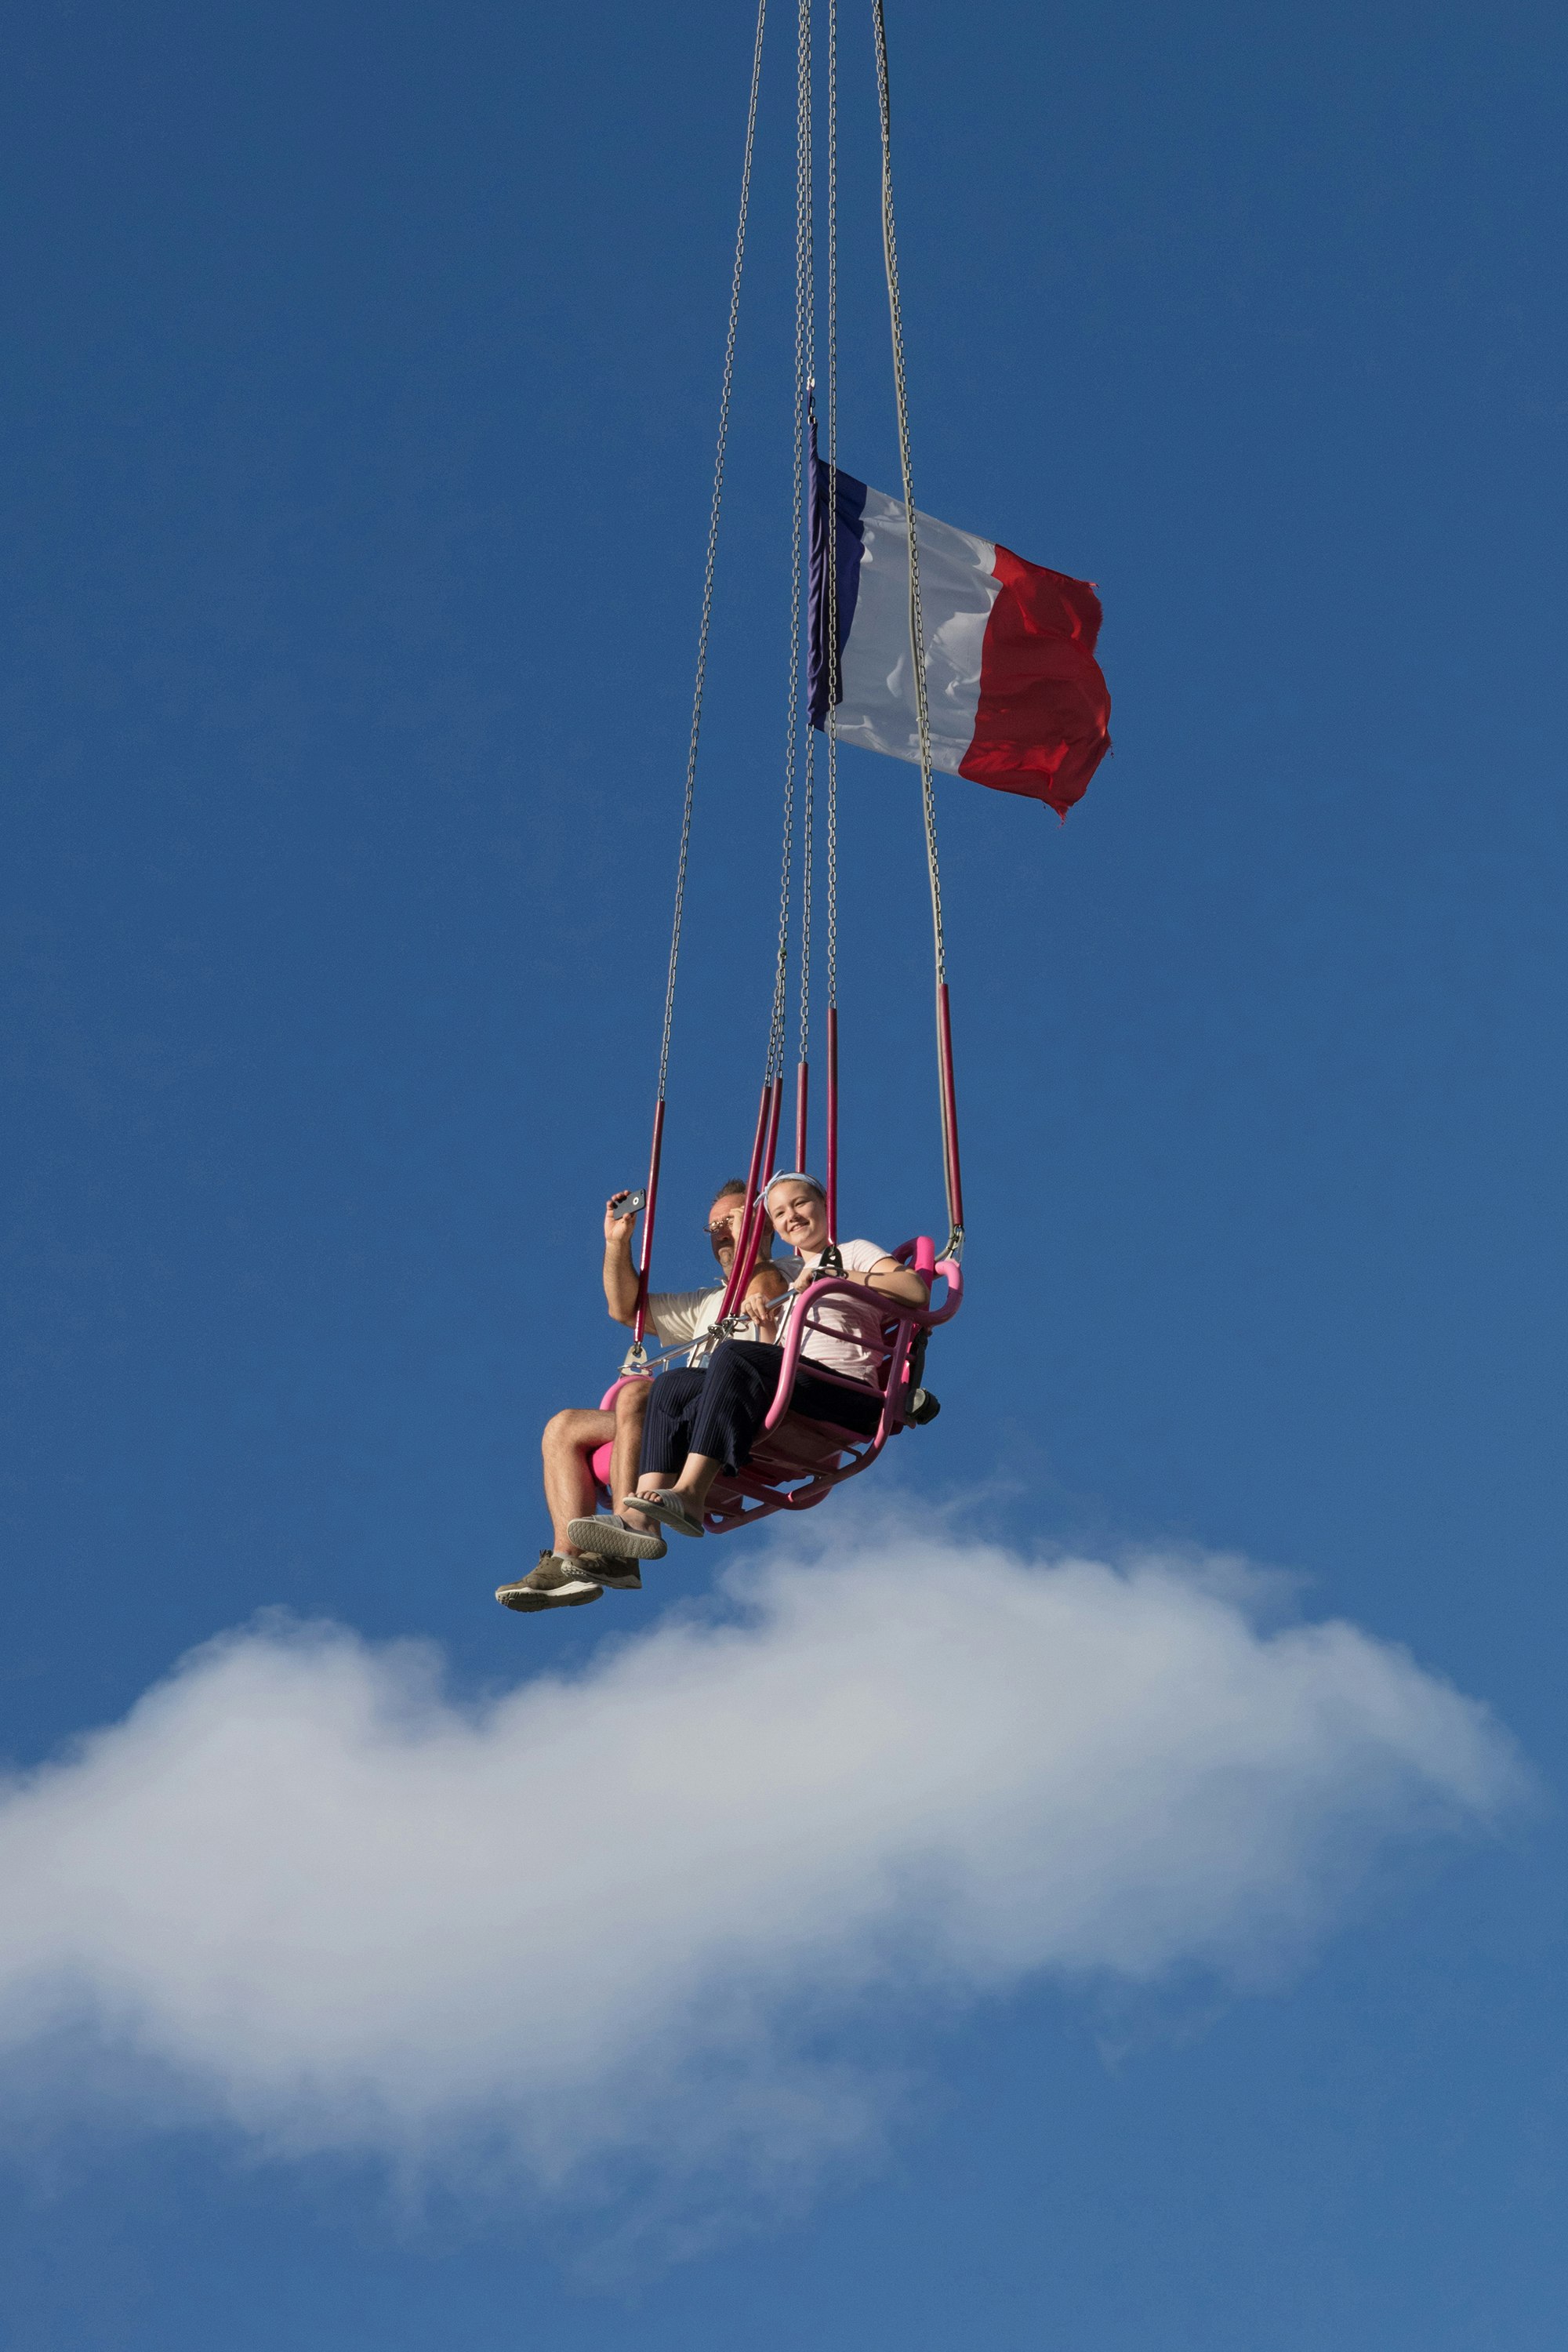 man in red shirt and black shorts riding on swing under blue sky during daytime